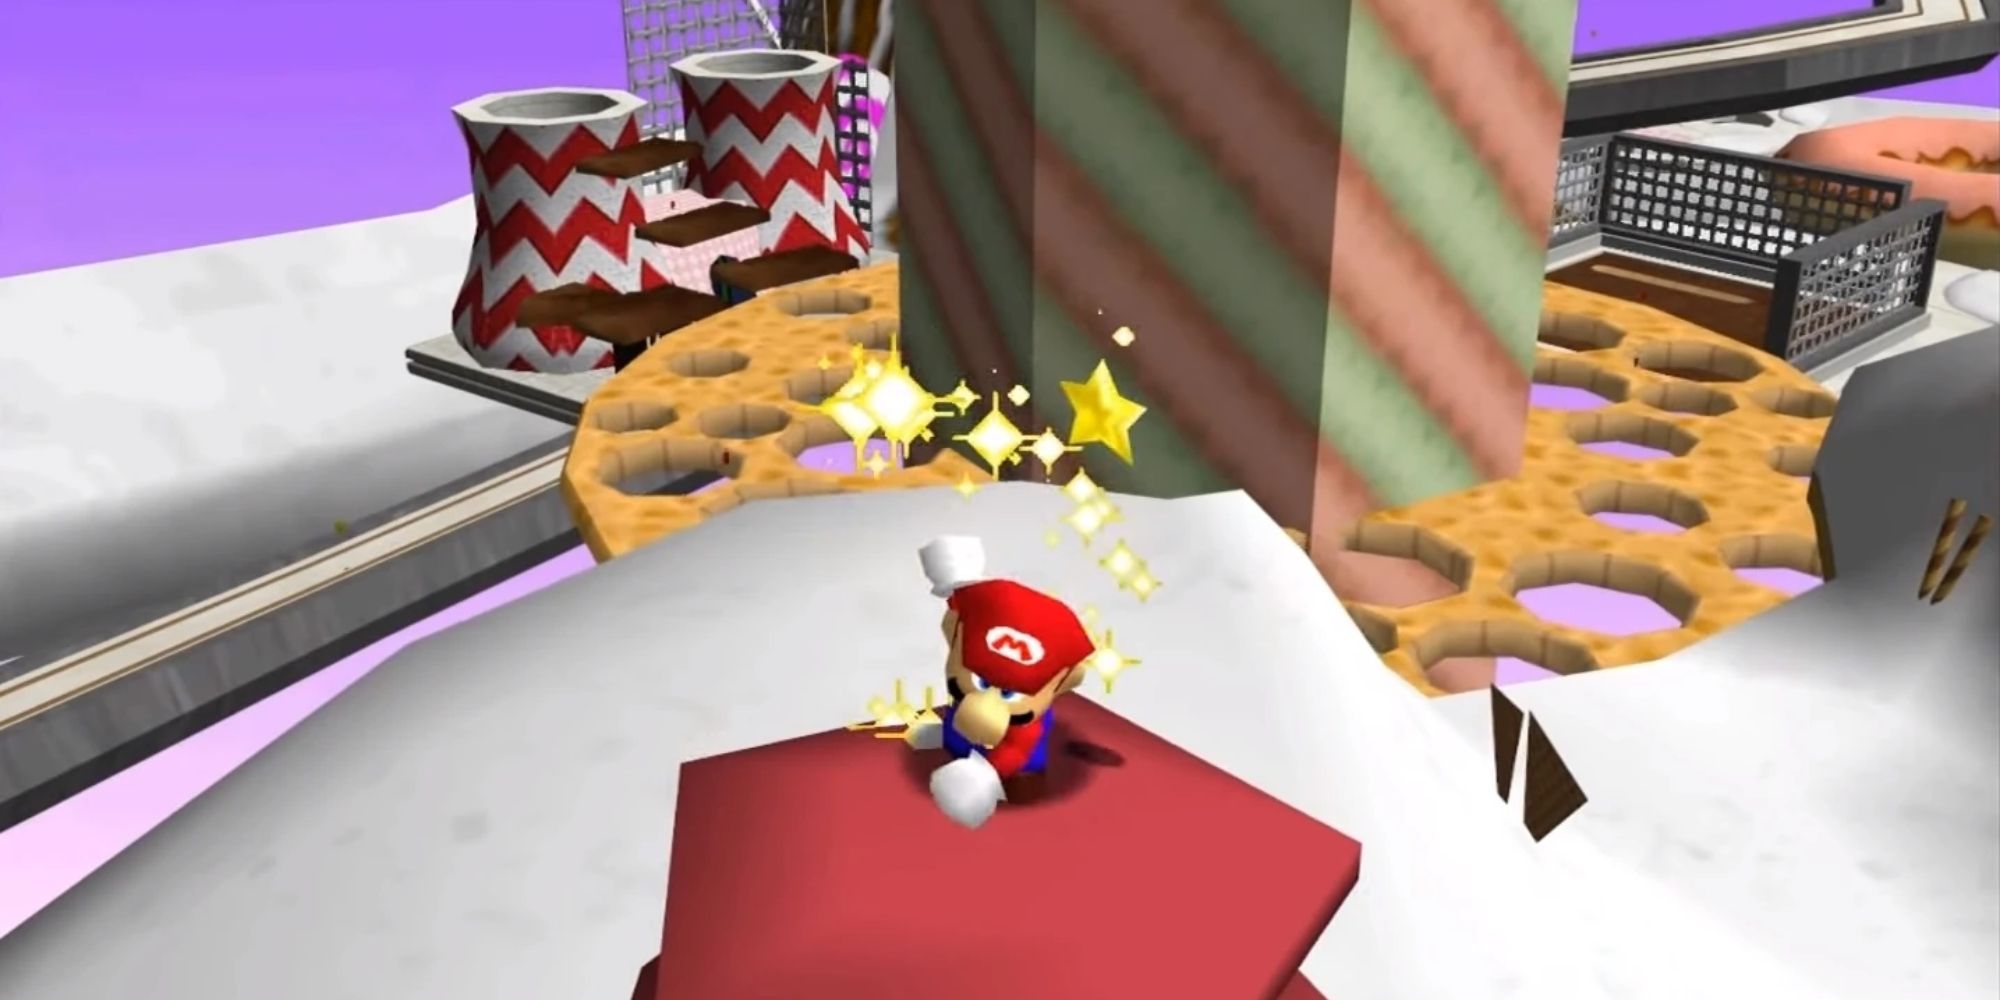 Mario knocked out in a dessert-themed world